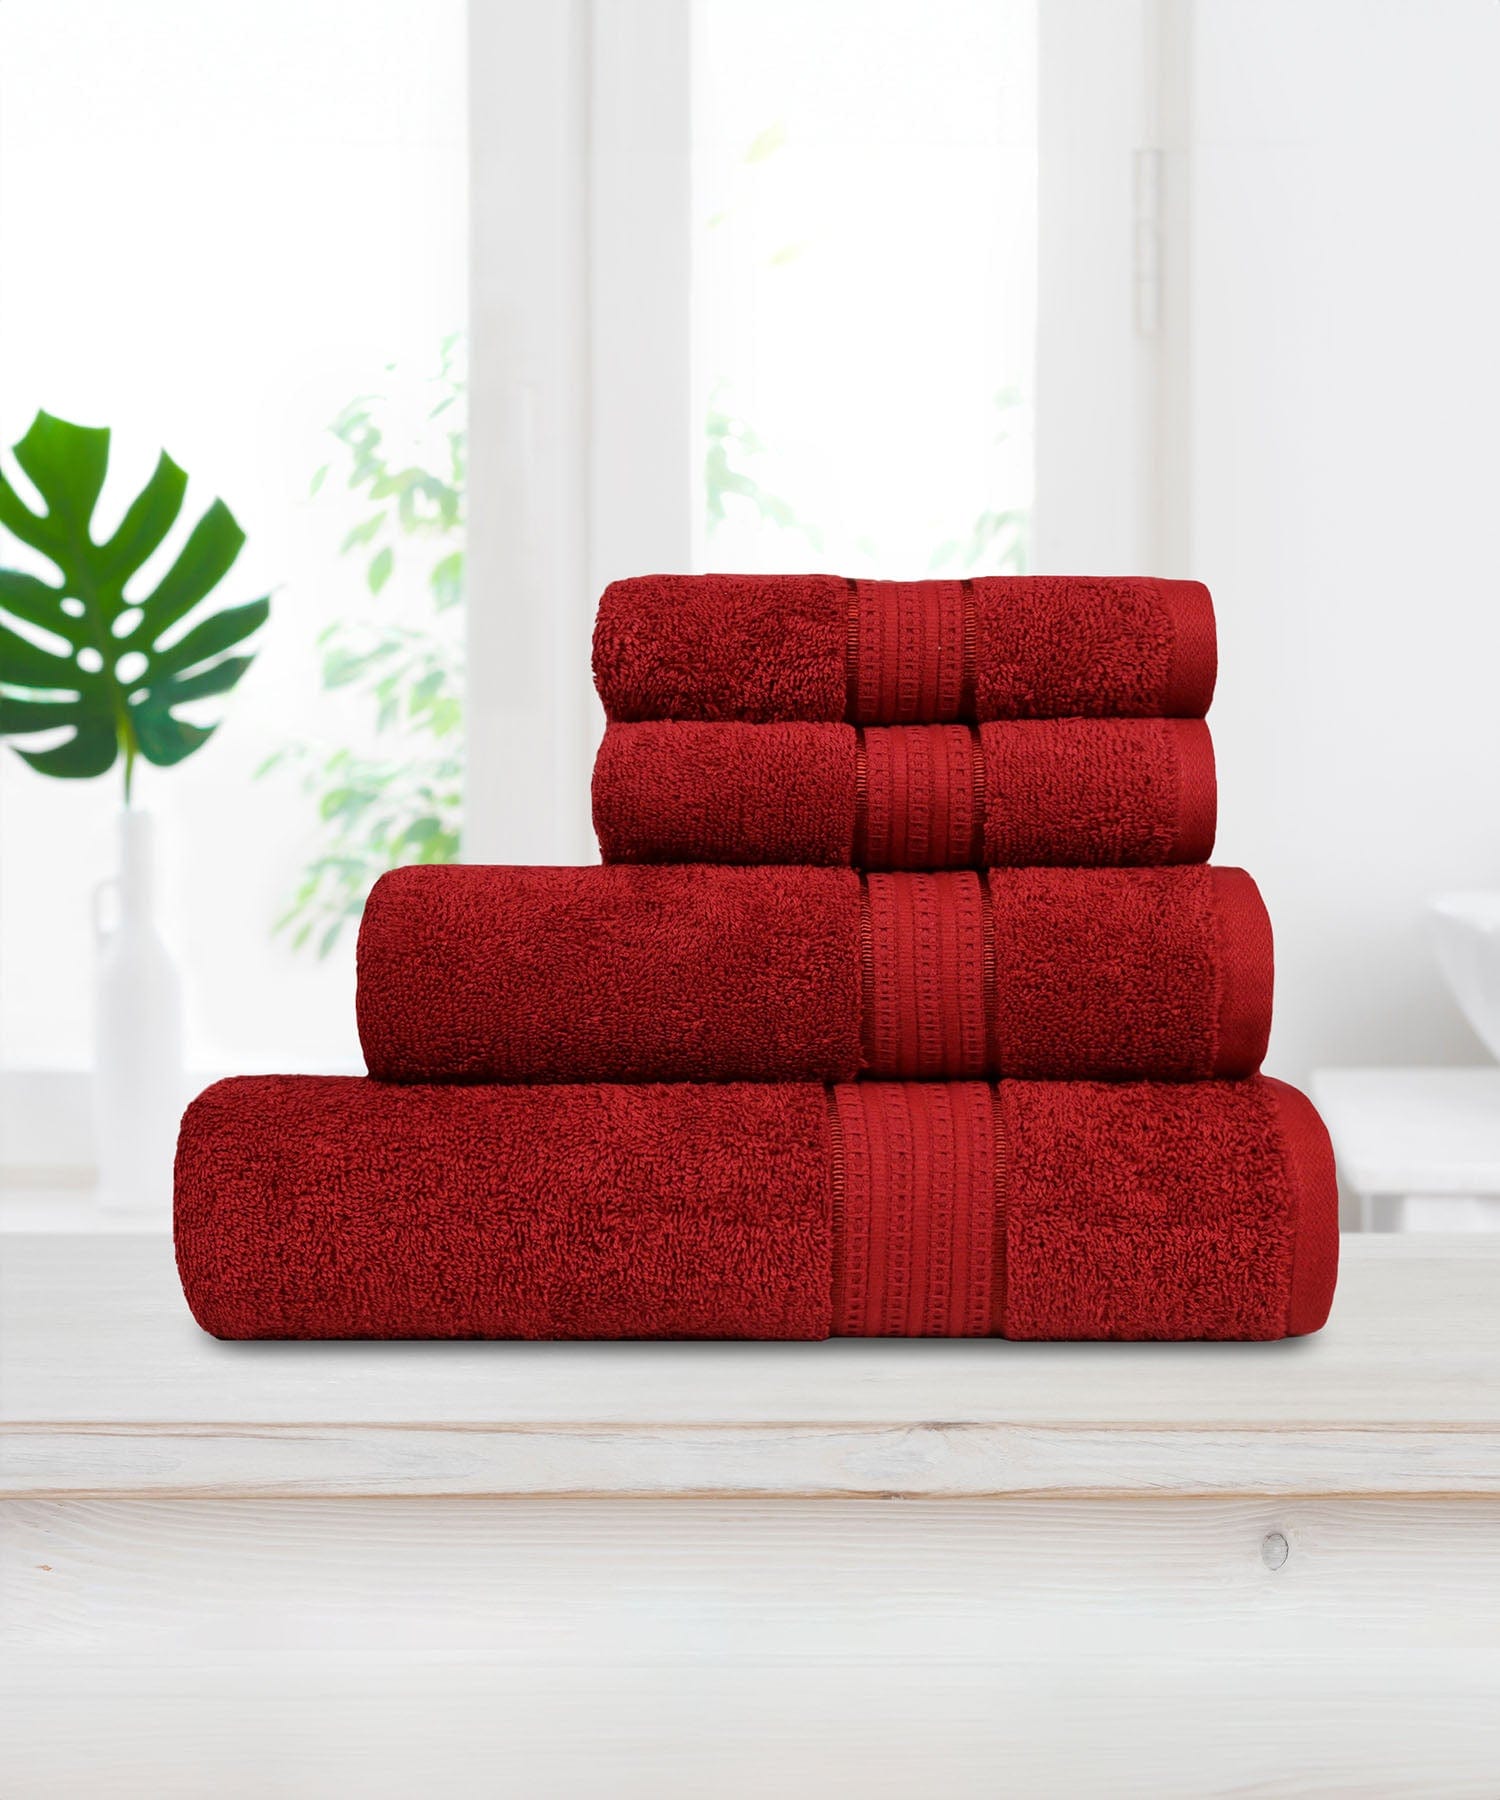 CARNIVAL TOWEL,100% Cotton,Durable,Super Soft, LOVELY RED